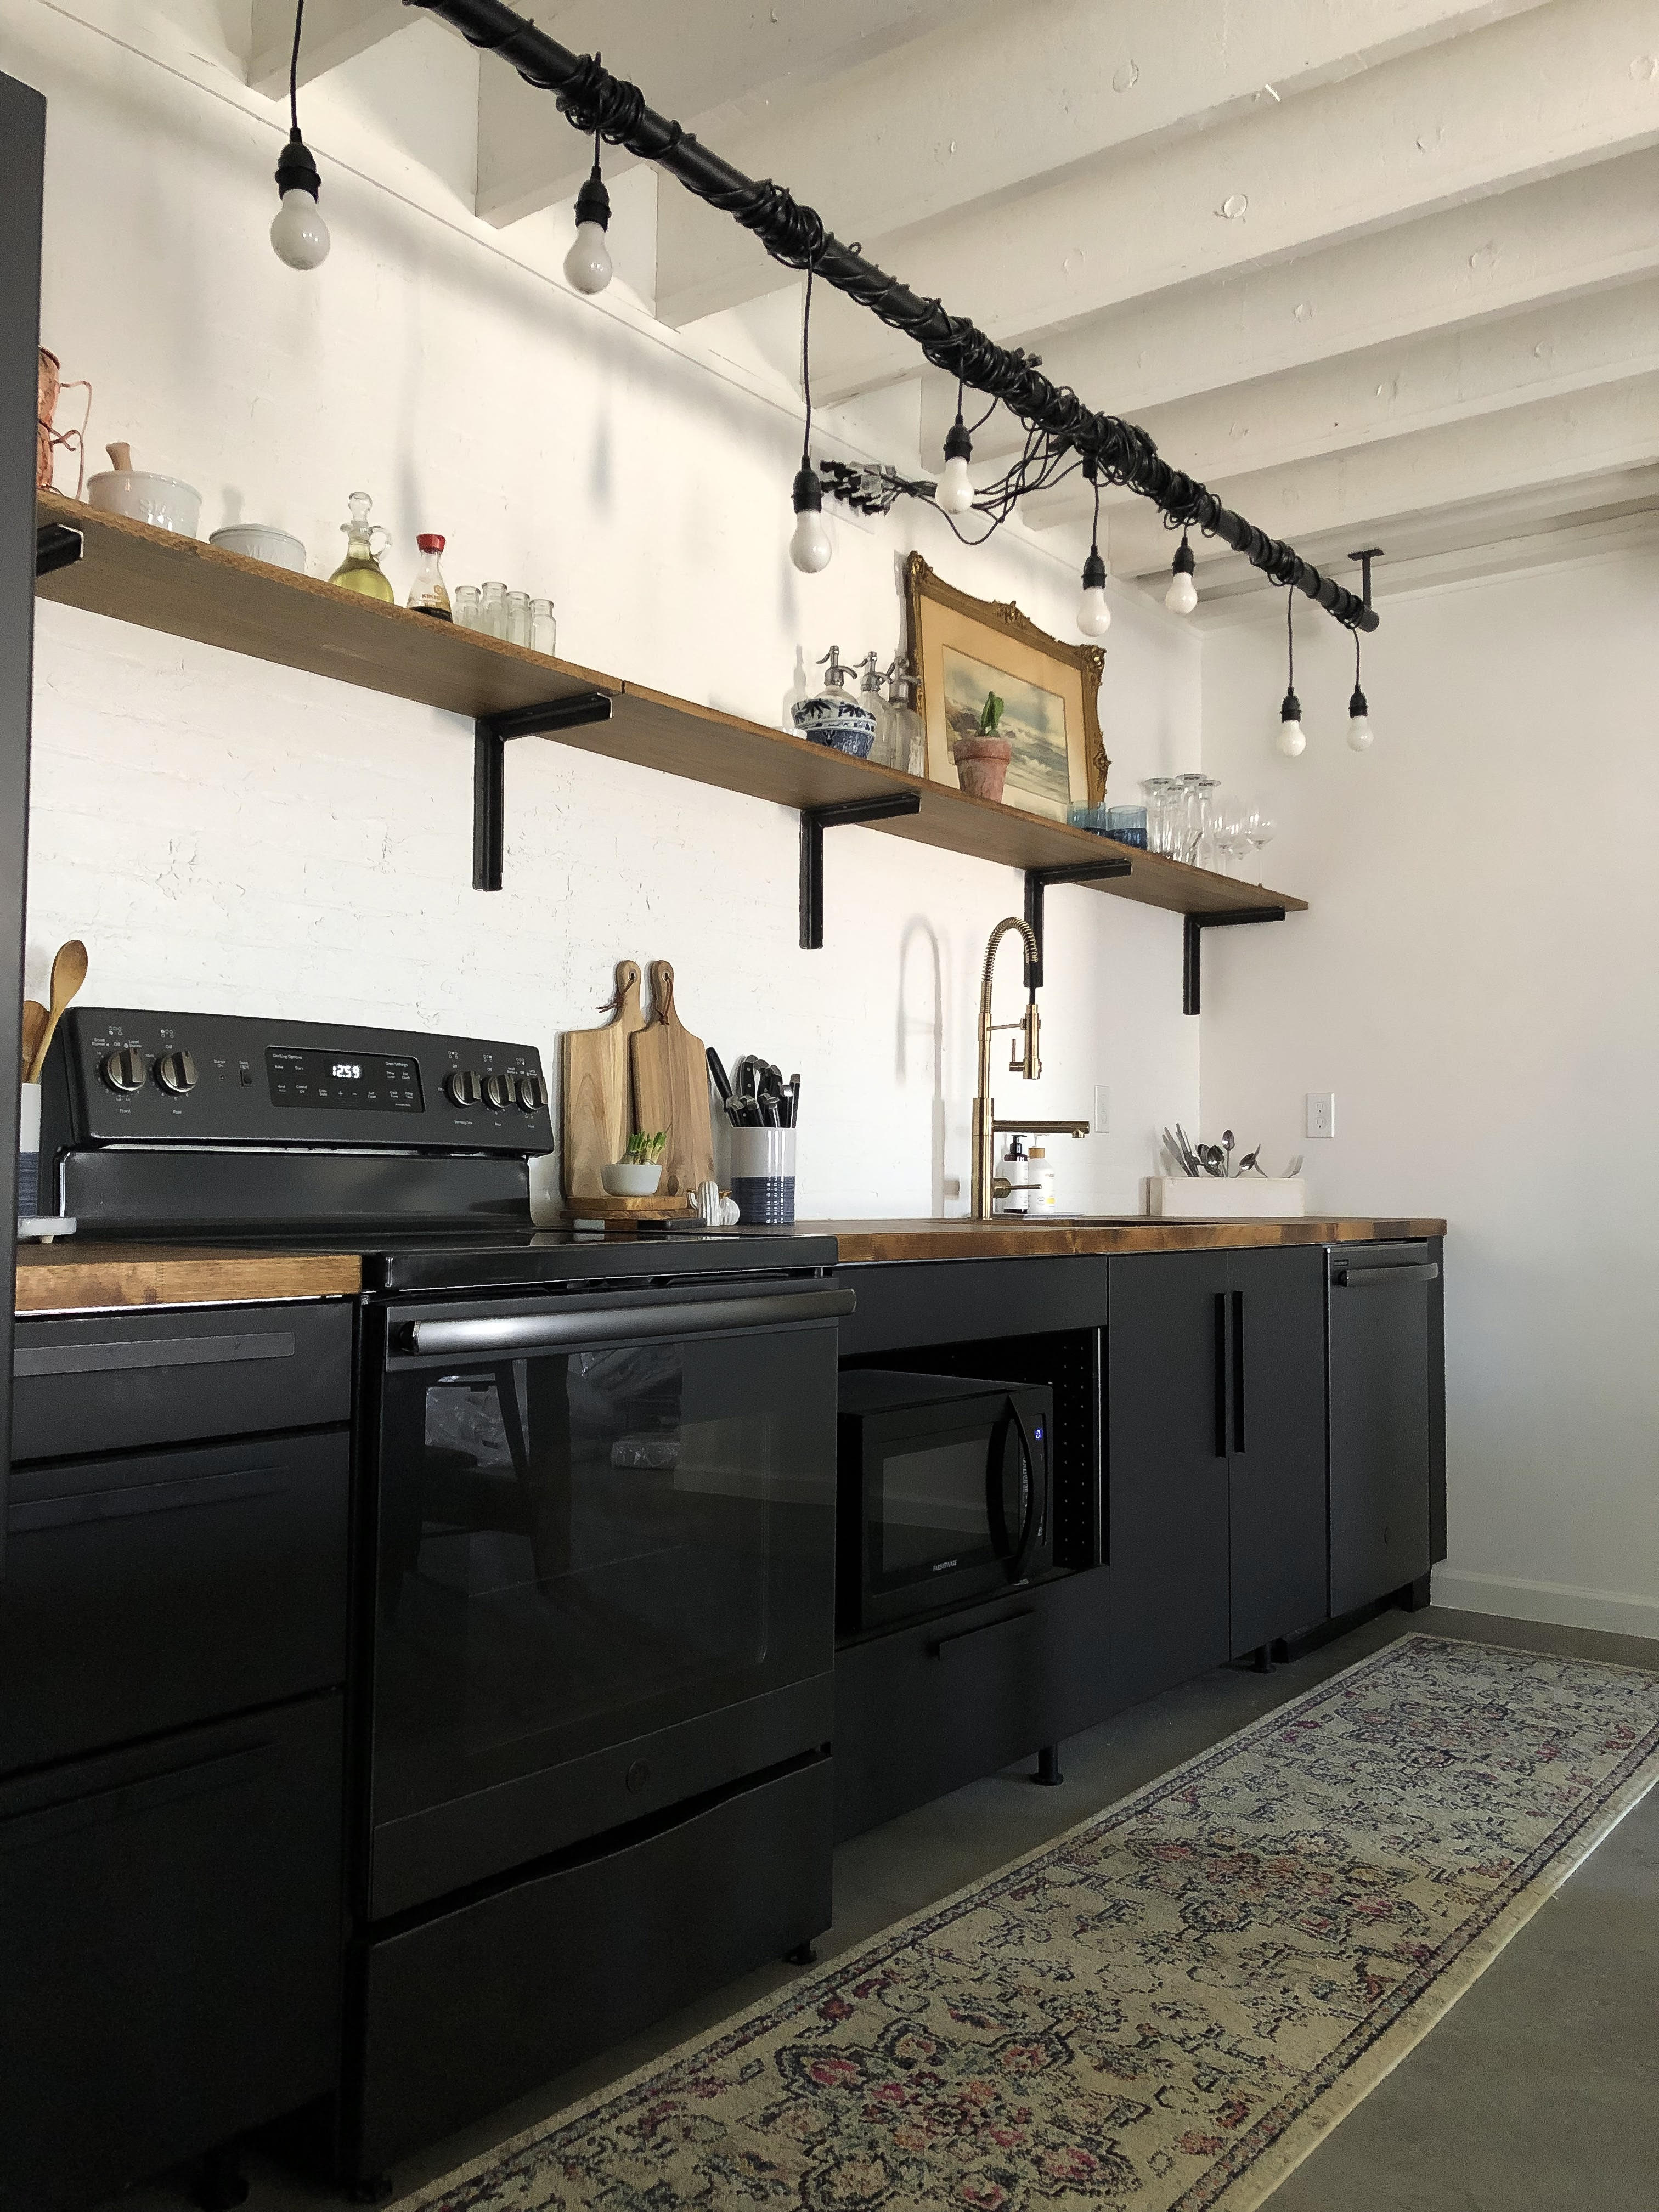 New Ikea Kitchen Cabinet Reviews Consumer Reports Beautikitchens for Small Space